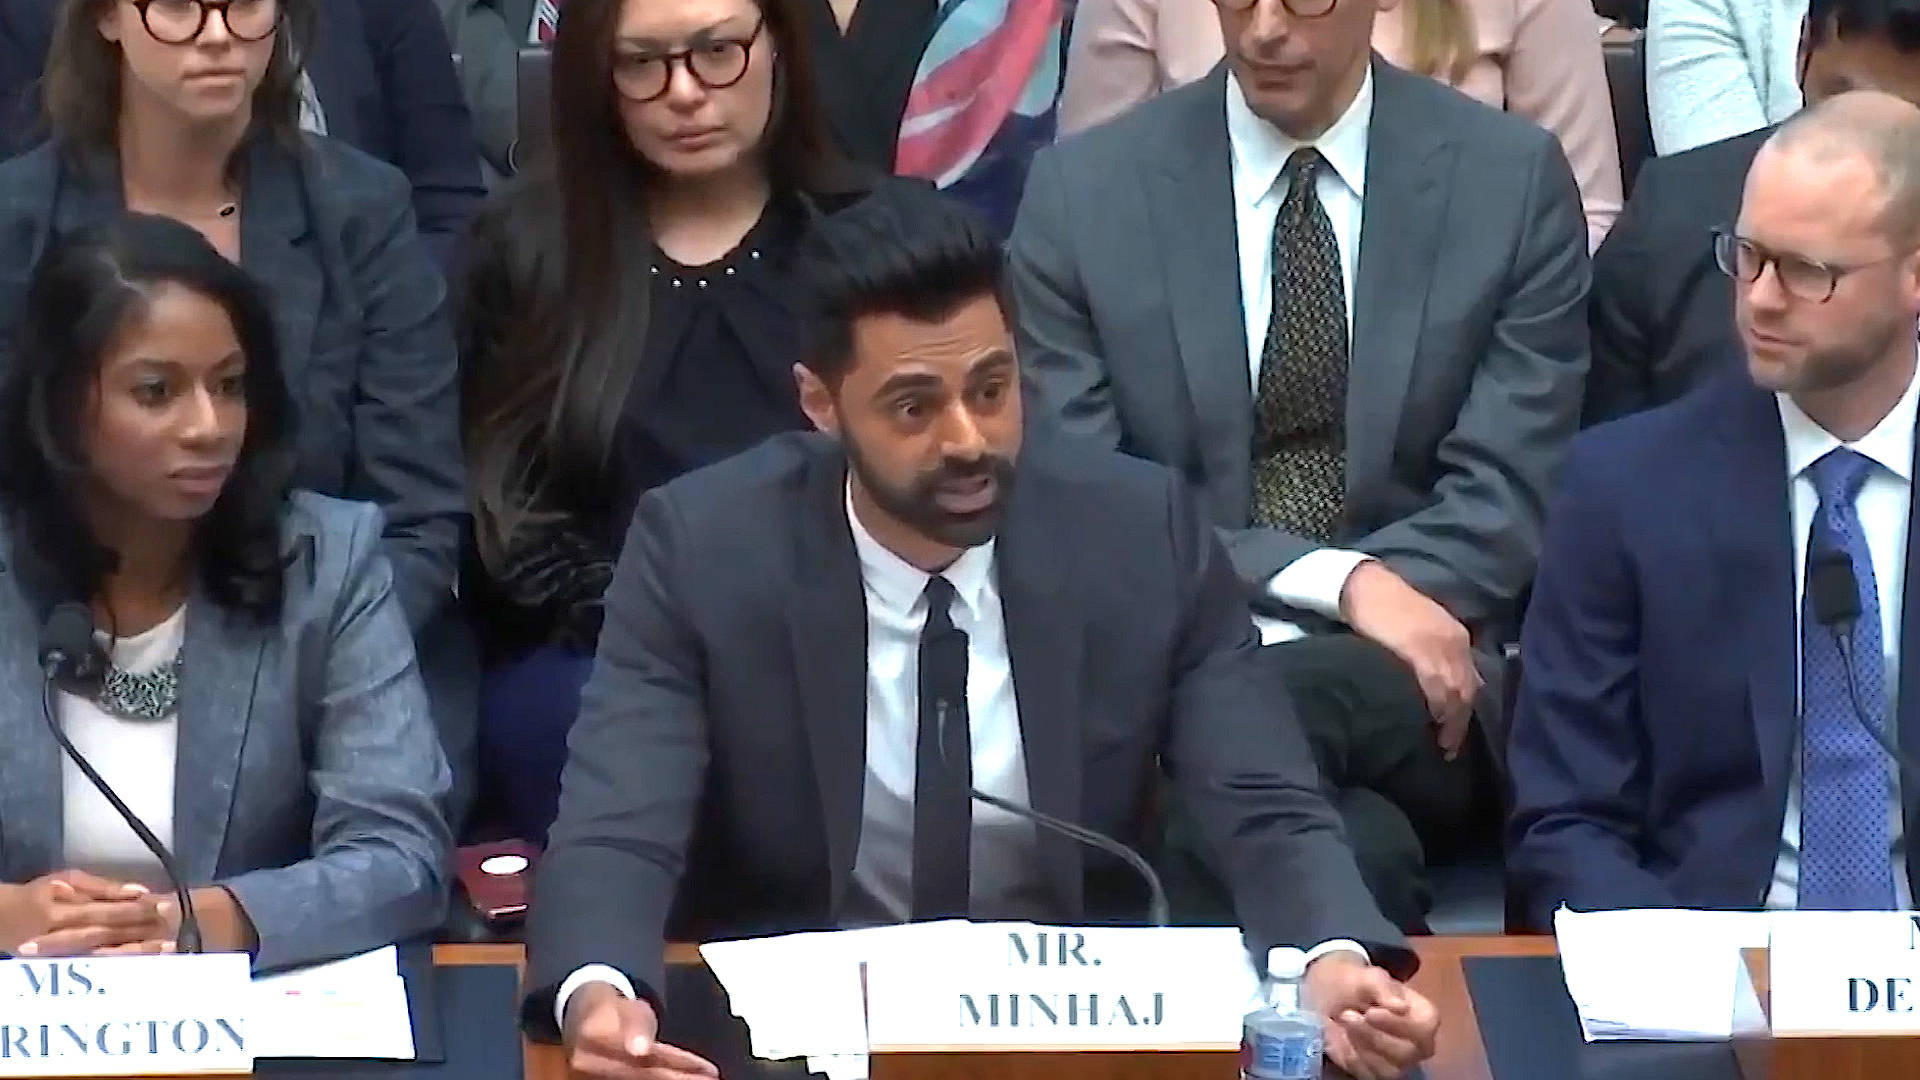 ﻿Comedian Hasan Minhaj Tells Congress that Student Debt is a “Paywall to the Middle Class”